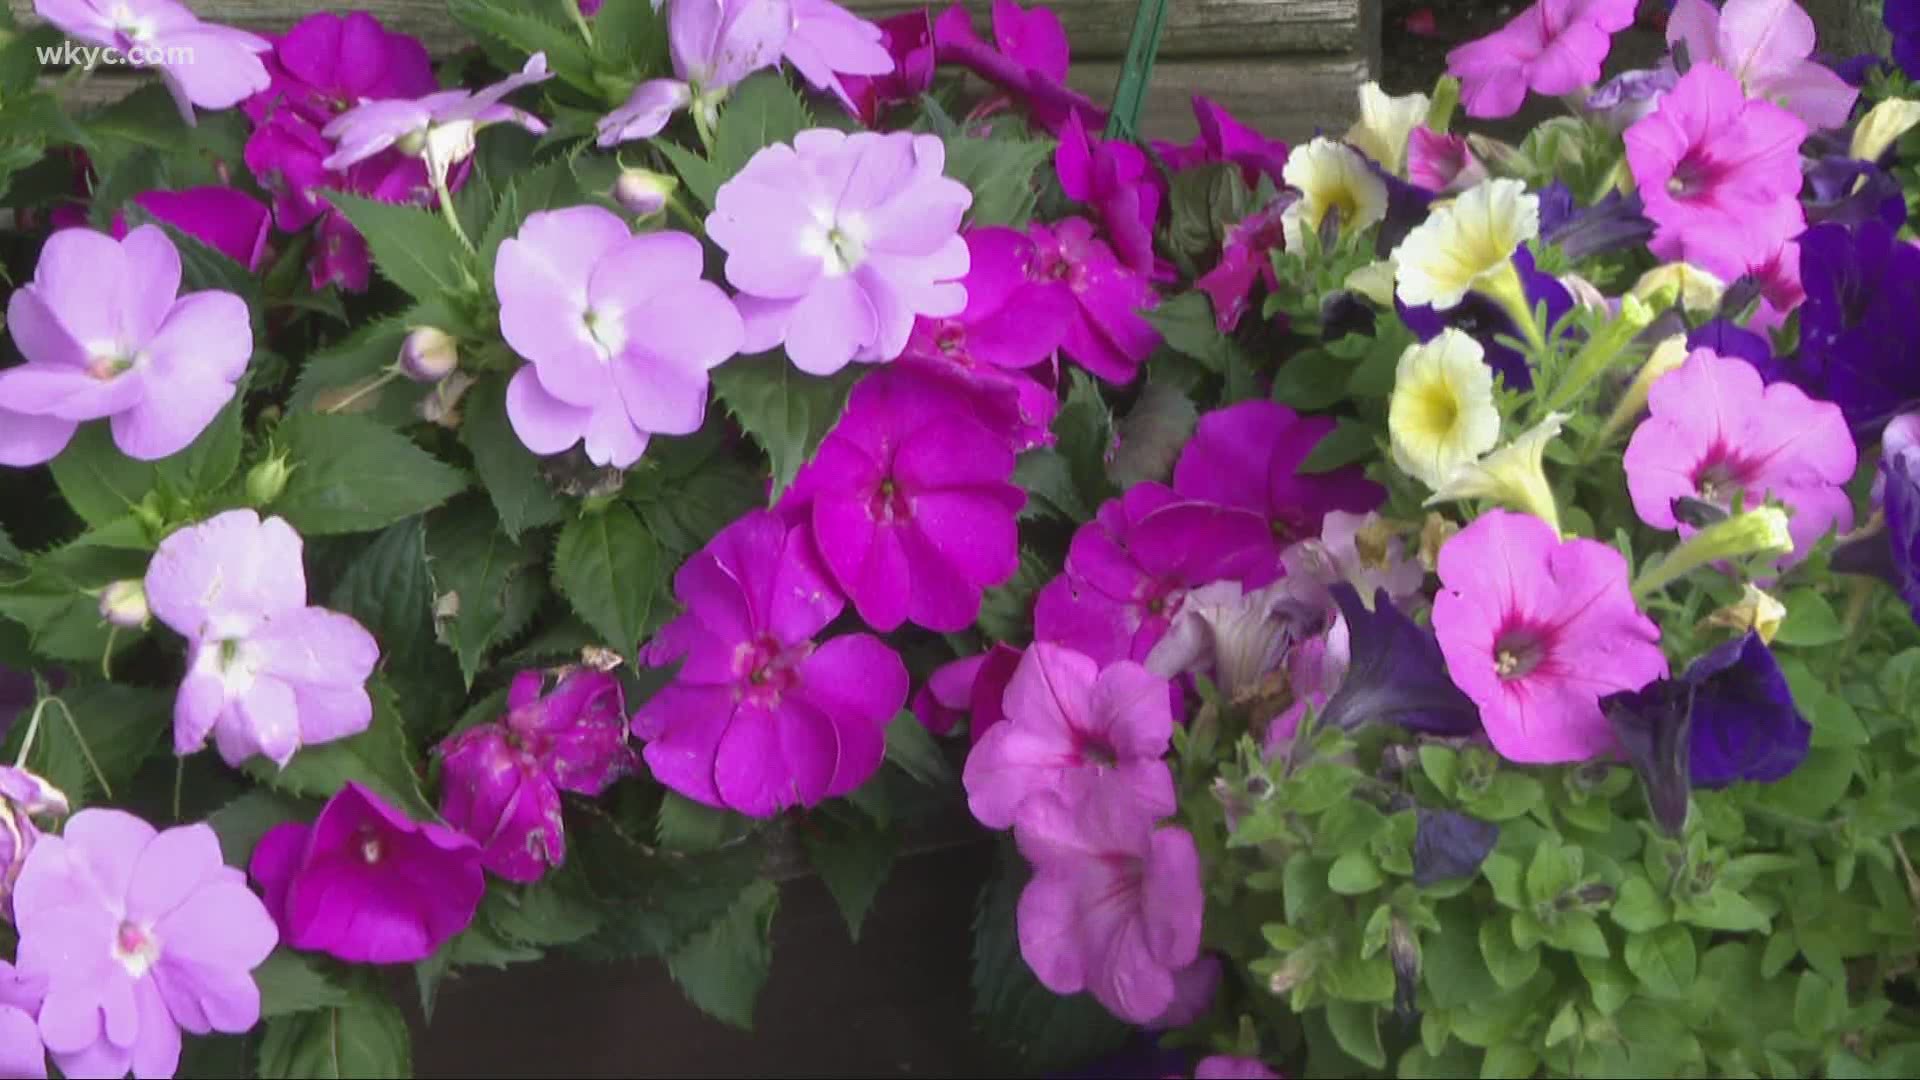 The experts at Breezewood Gardens share their advice on how to make your yard a bit more appealing this year.